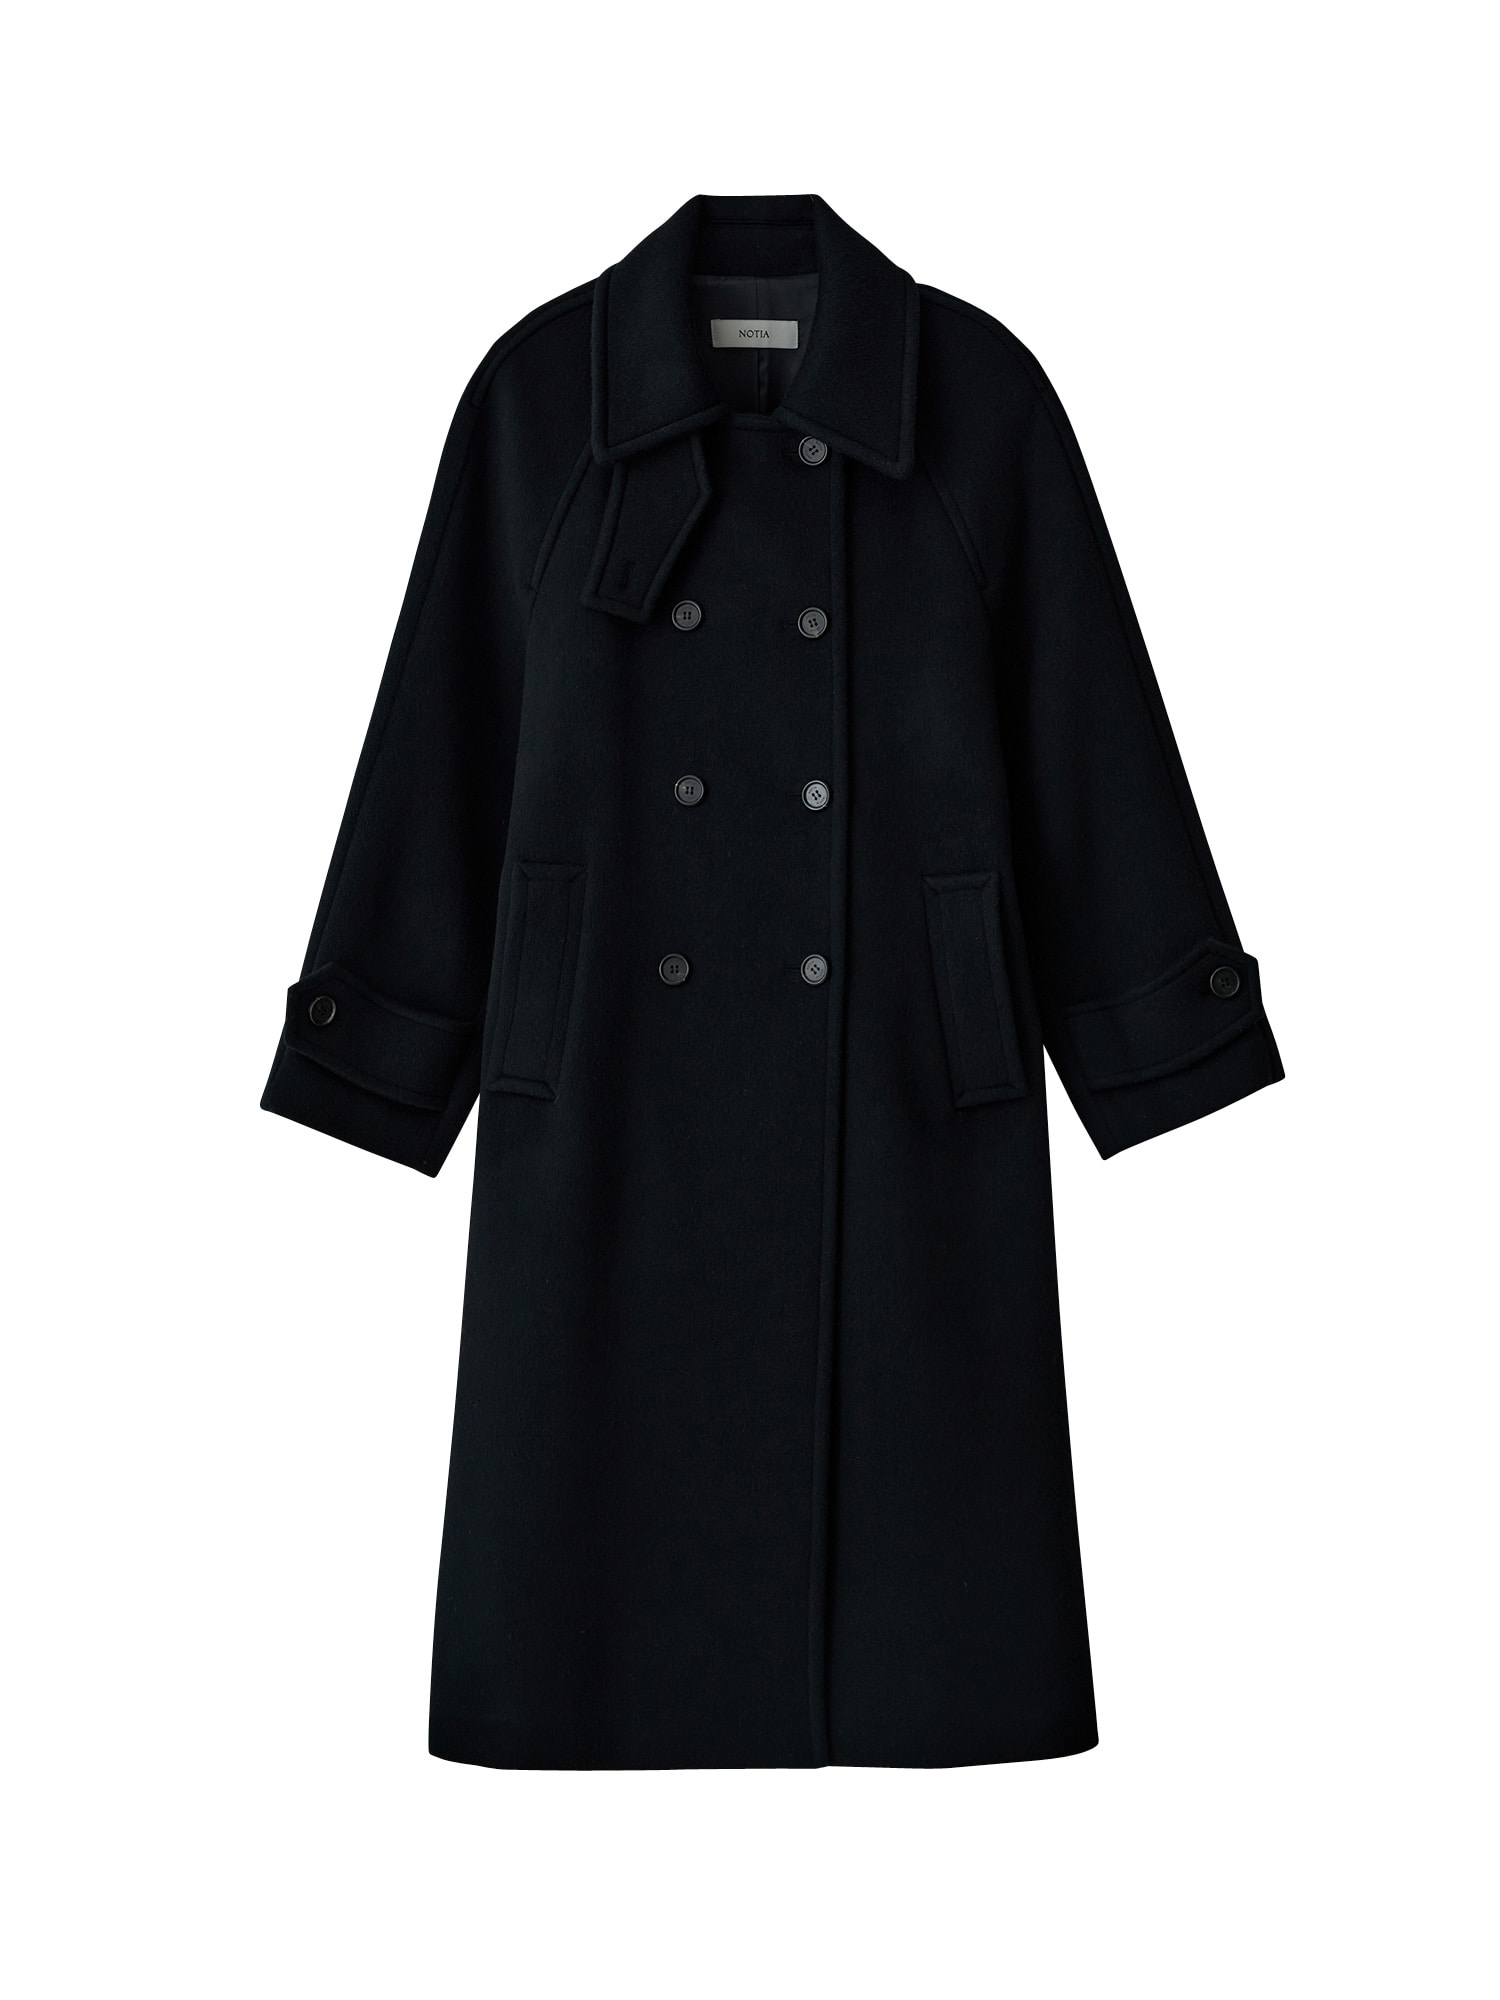 Double Breasted Balmaccan Coat - Black